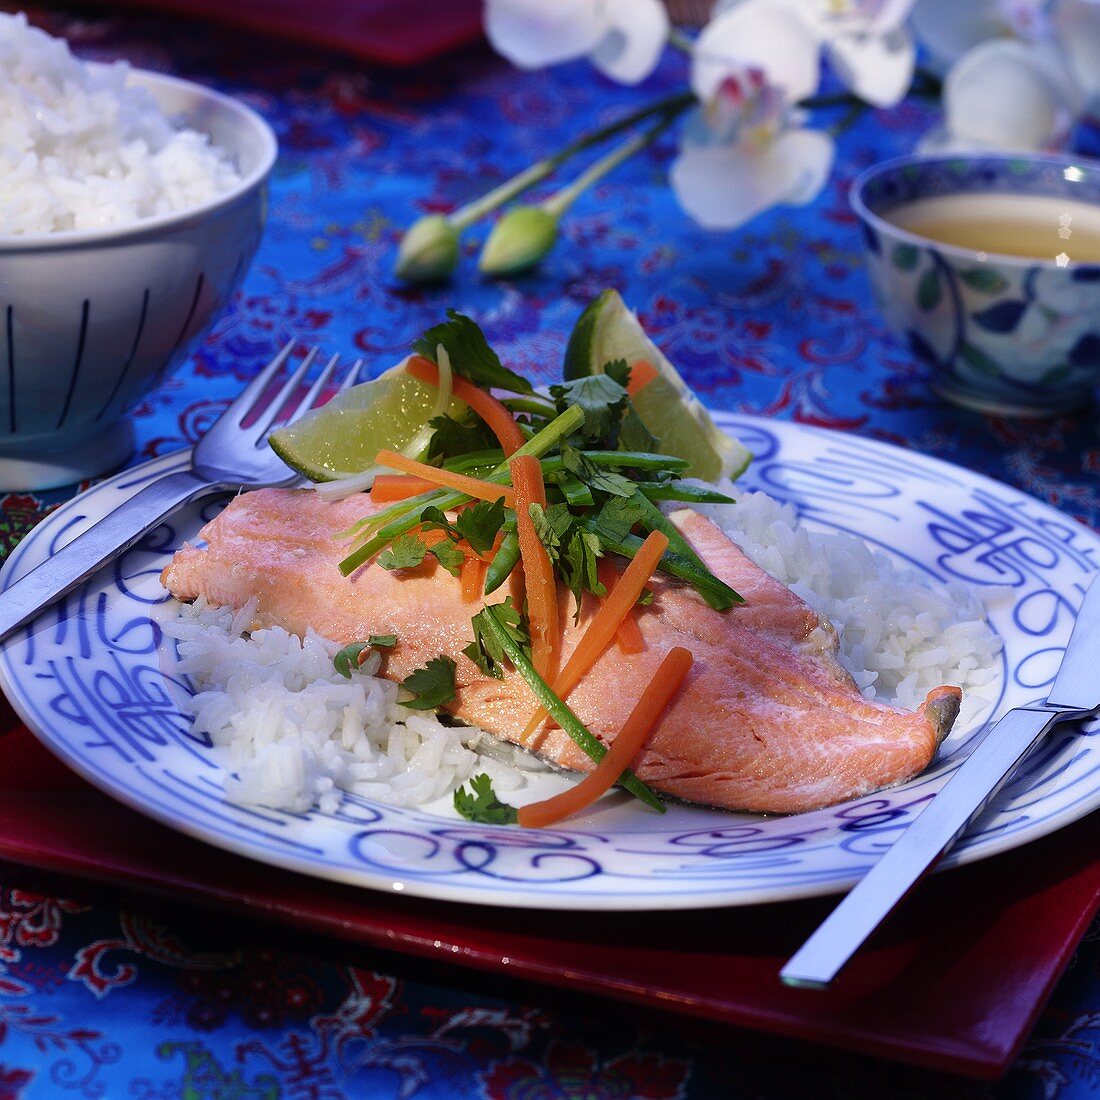 Salmon trout with vegetables, limes and rice